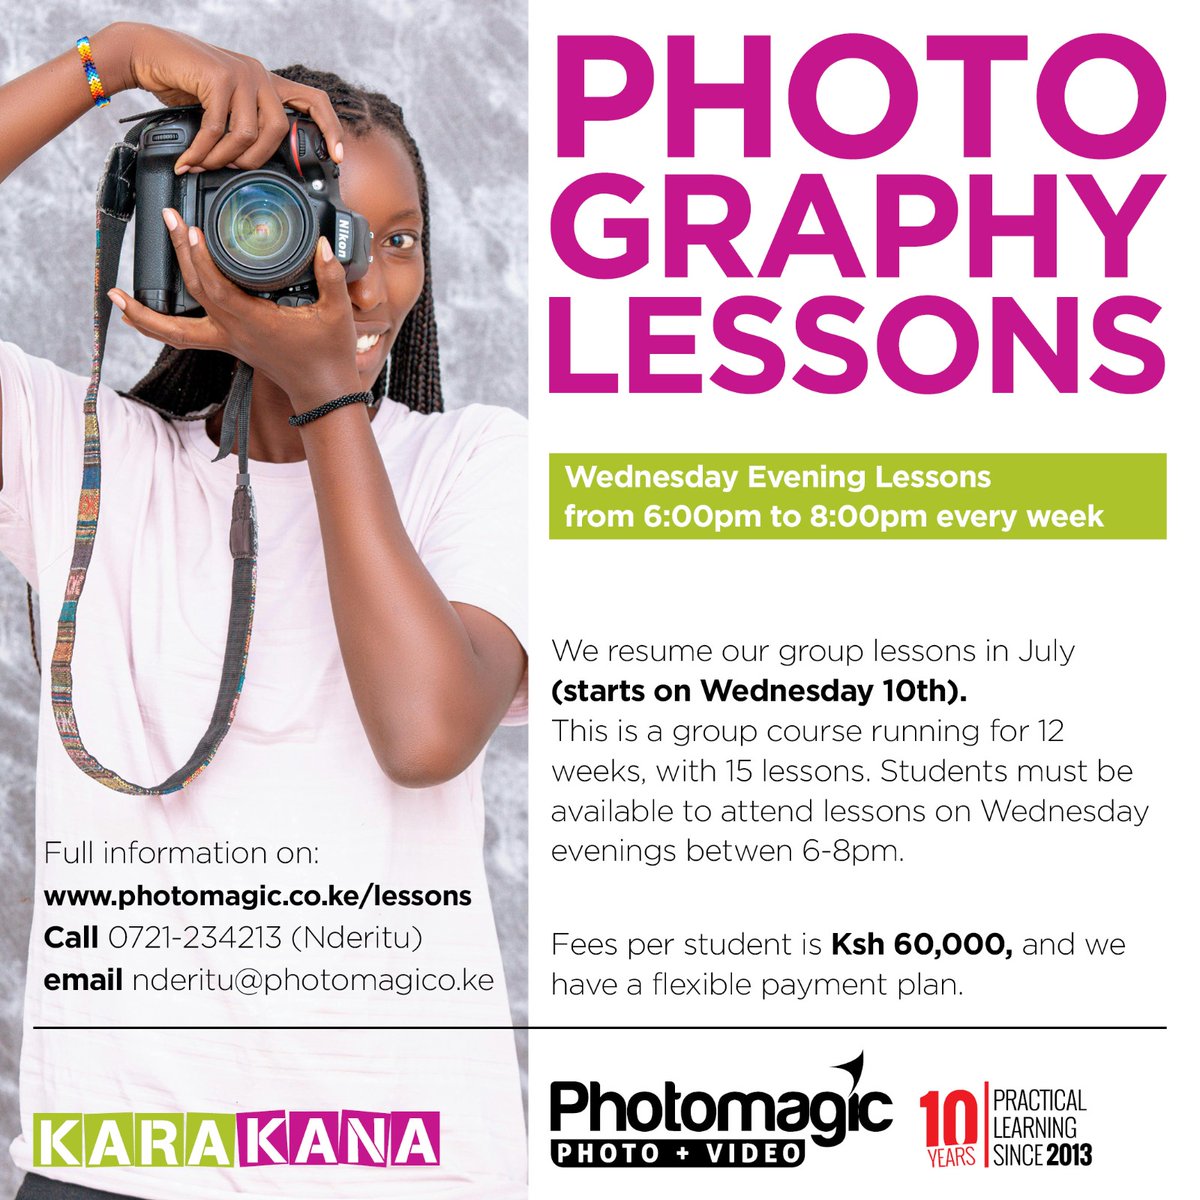 PHOTOGRAPHY GROUP LESSONS

Photomagic Studio is offering group photography lessons starting in July, Applications are now open.